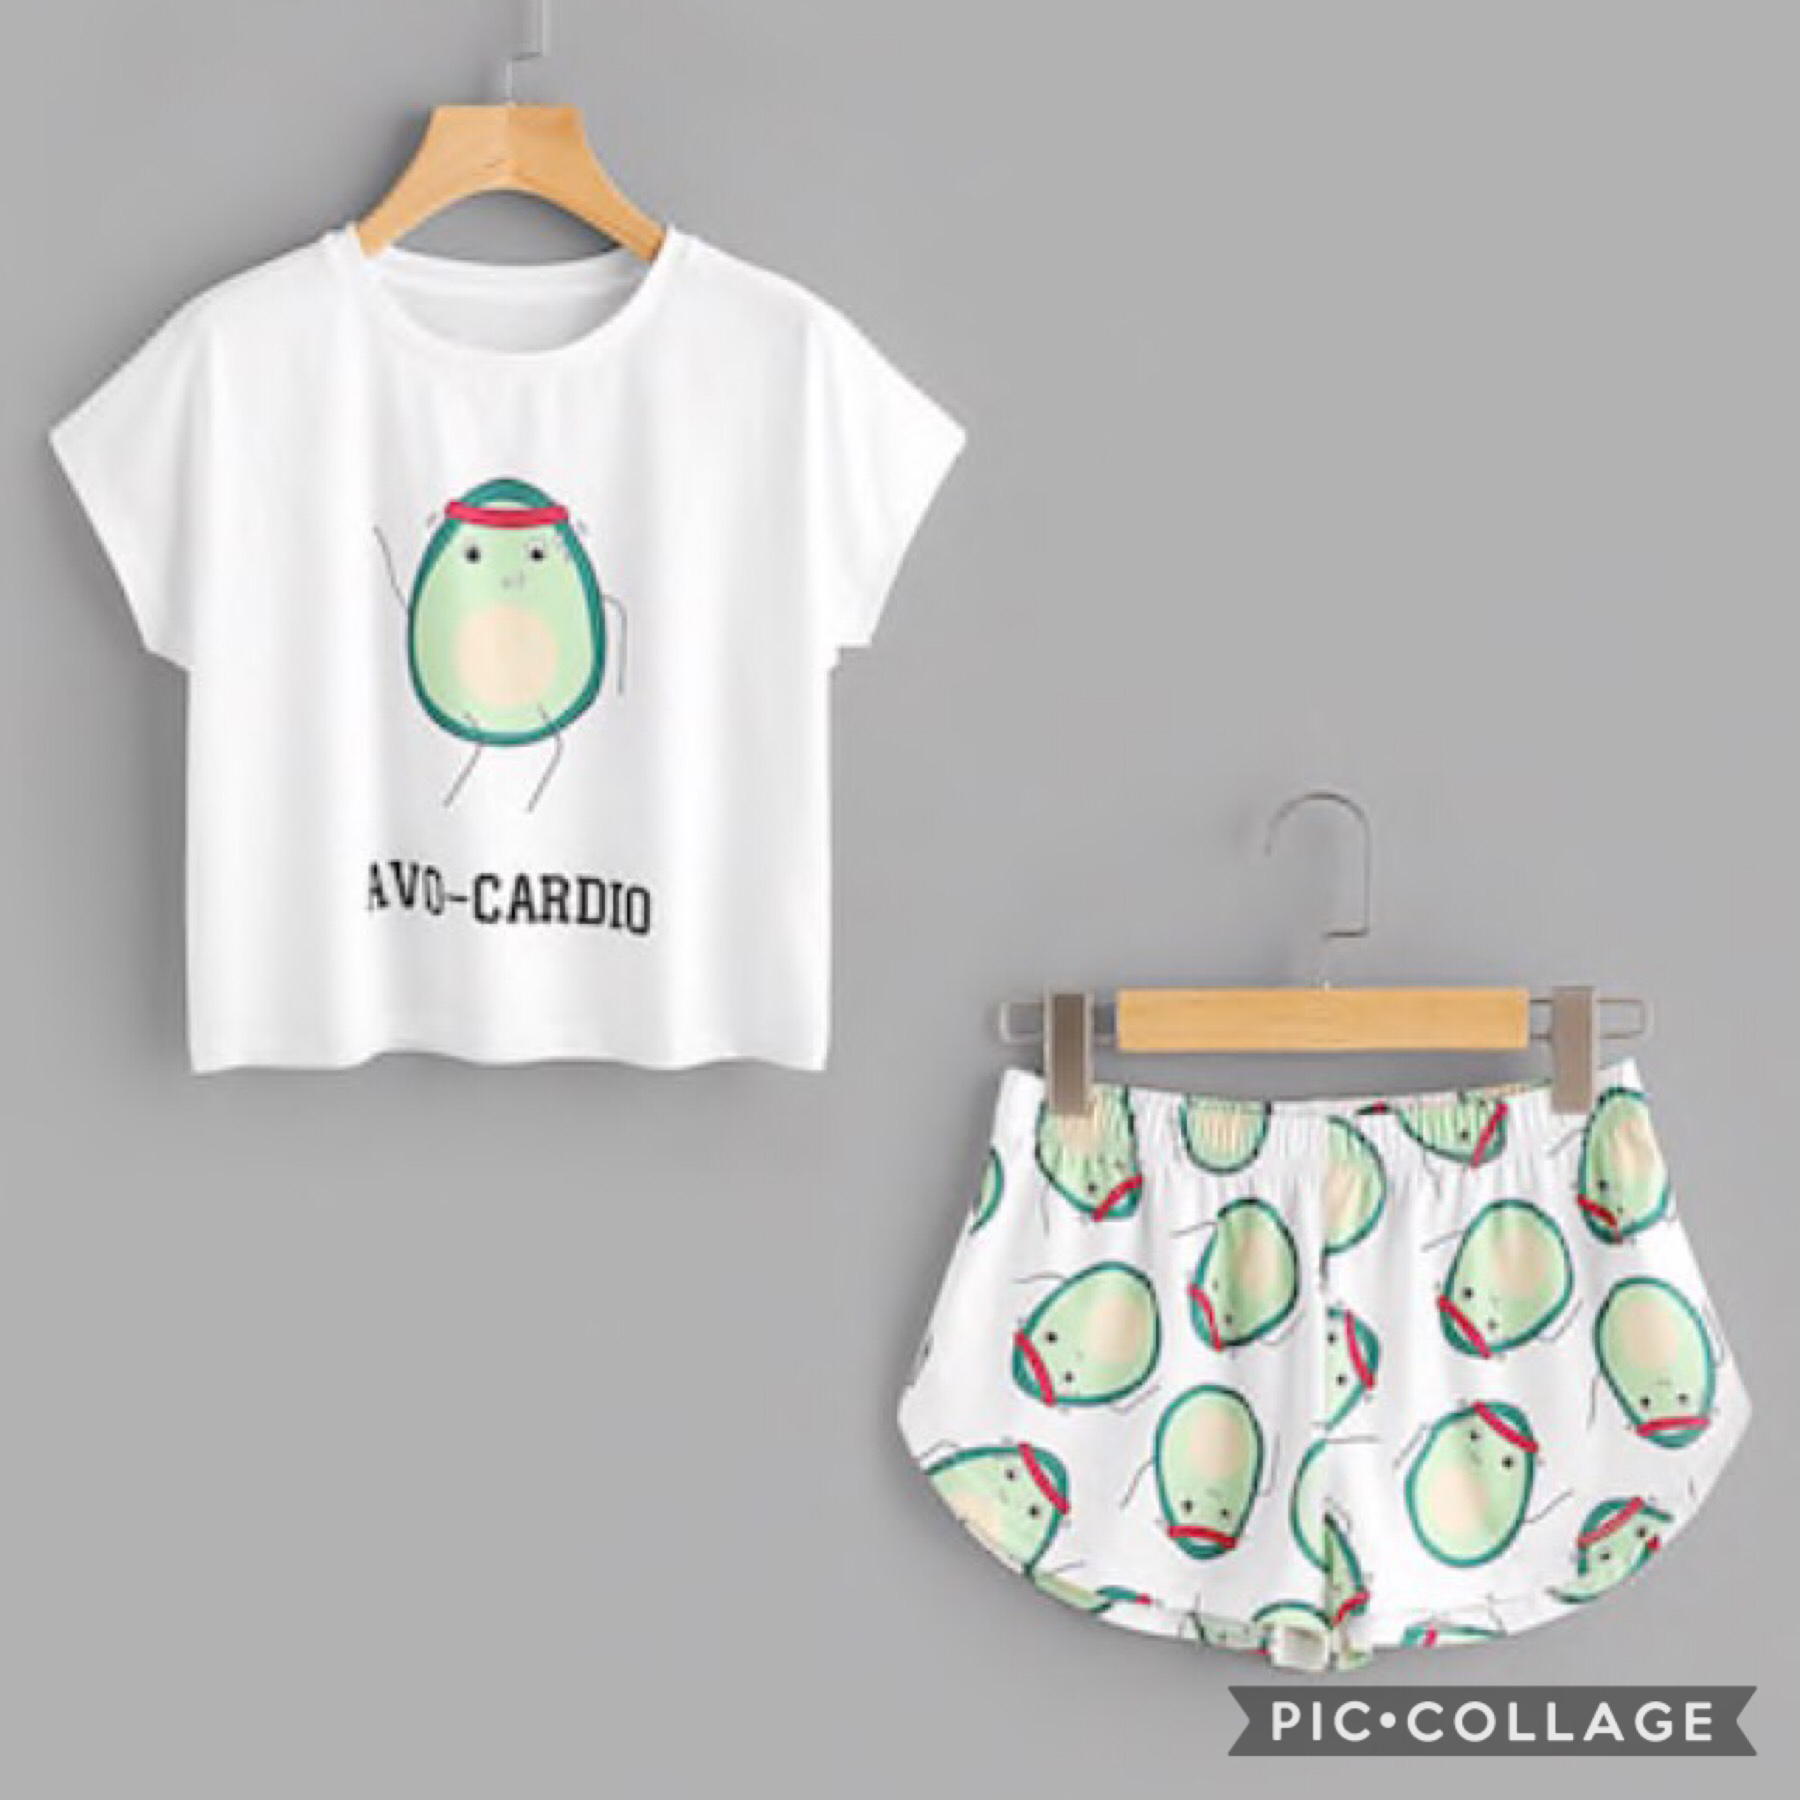 💙These avocado pajamas are literally so cute get them on SHEIN for $13